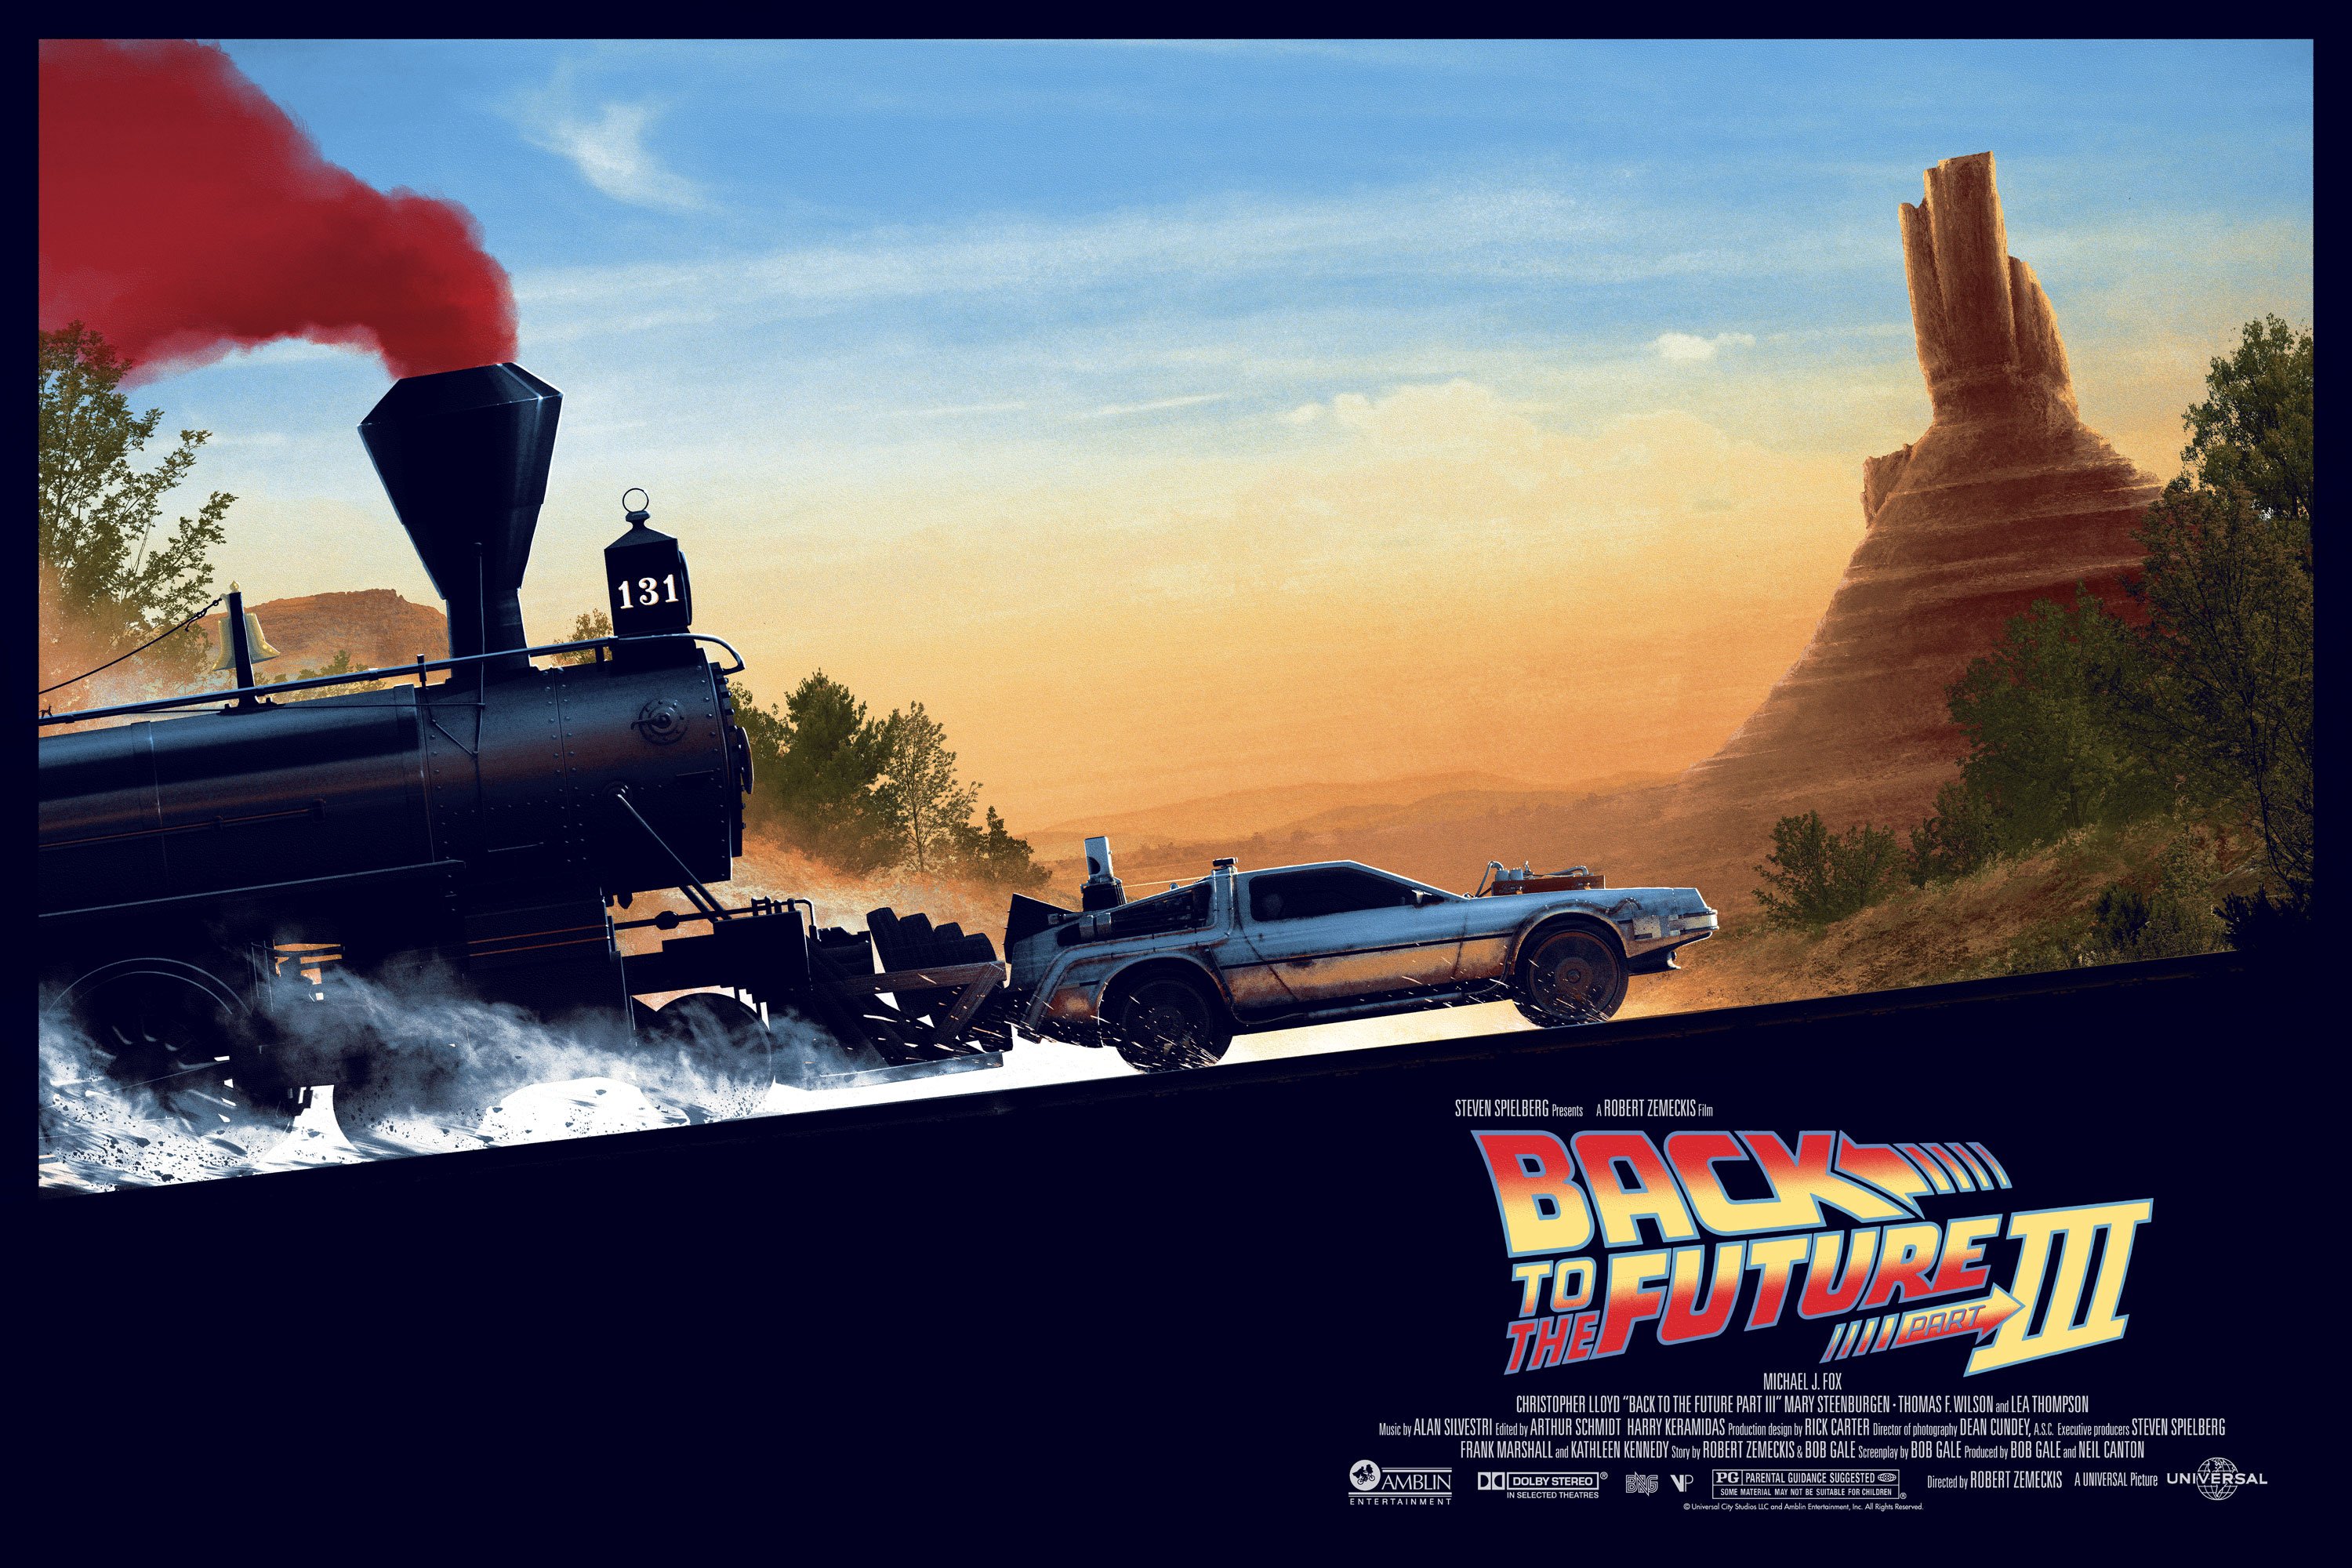 Movie Back To The Future Part III HD Wallpaper | Background Image